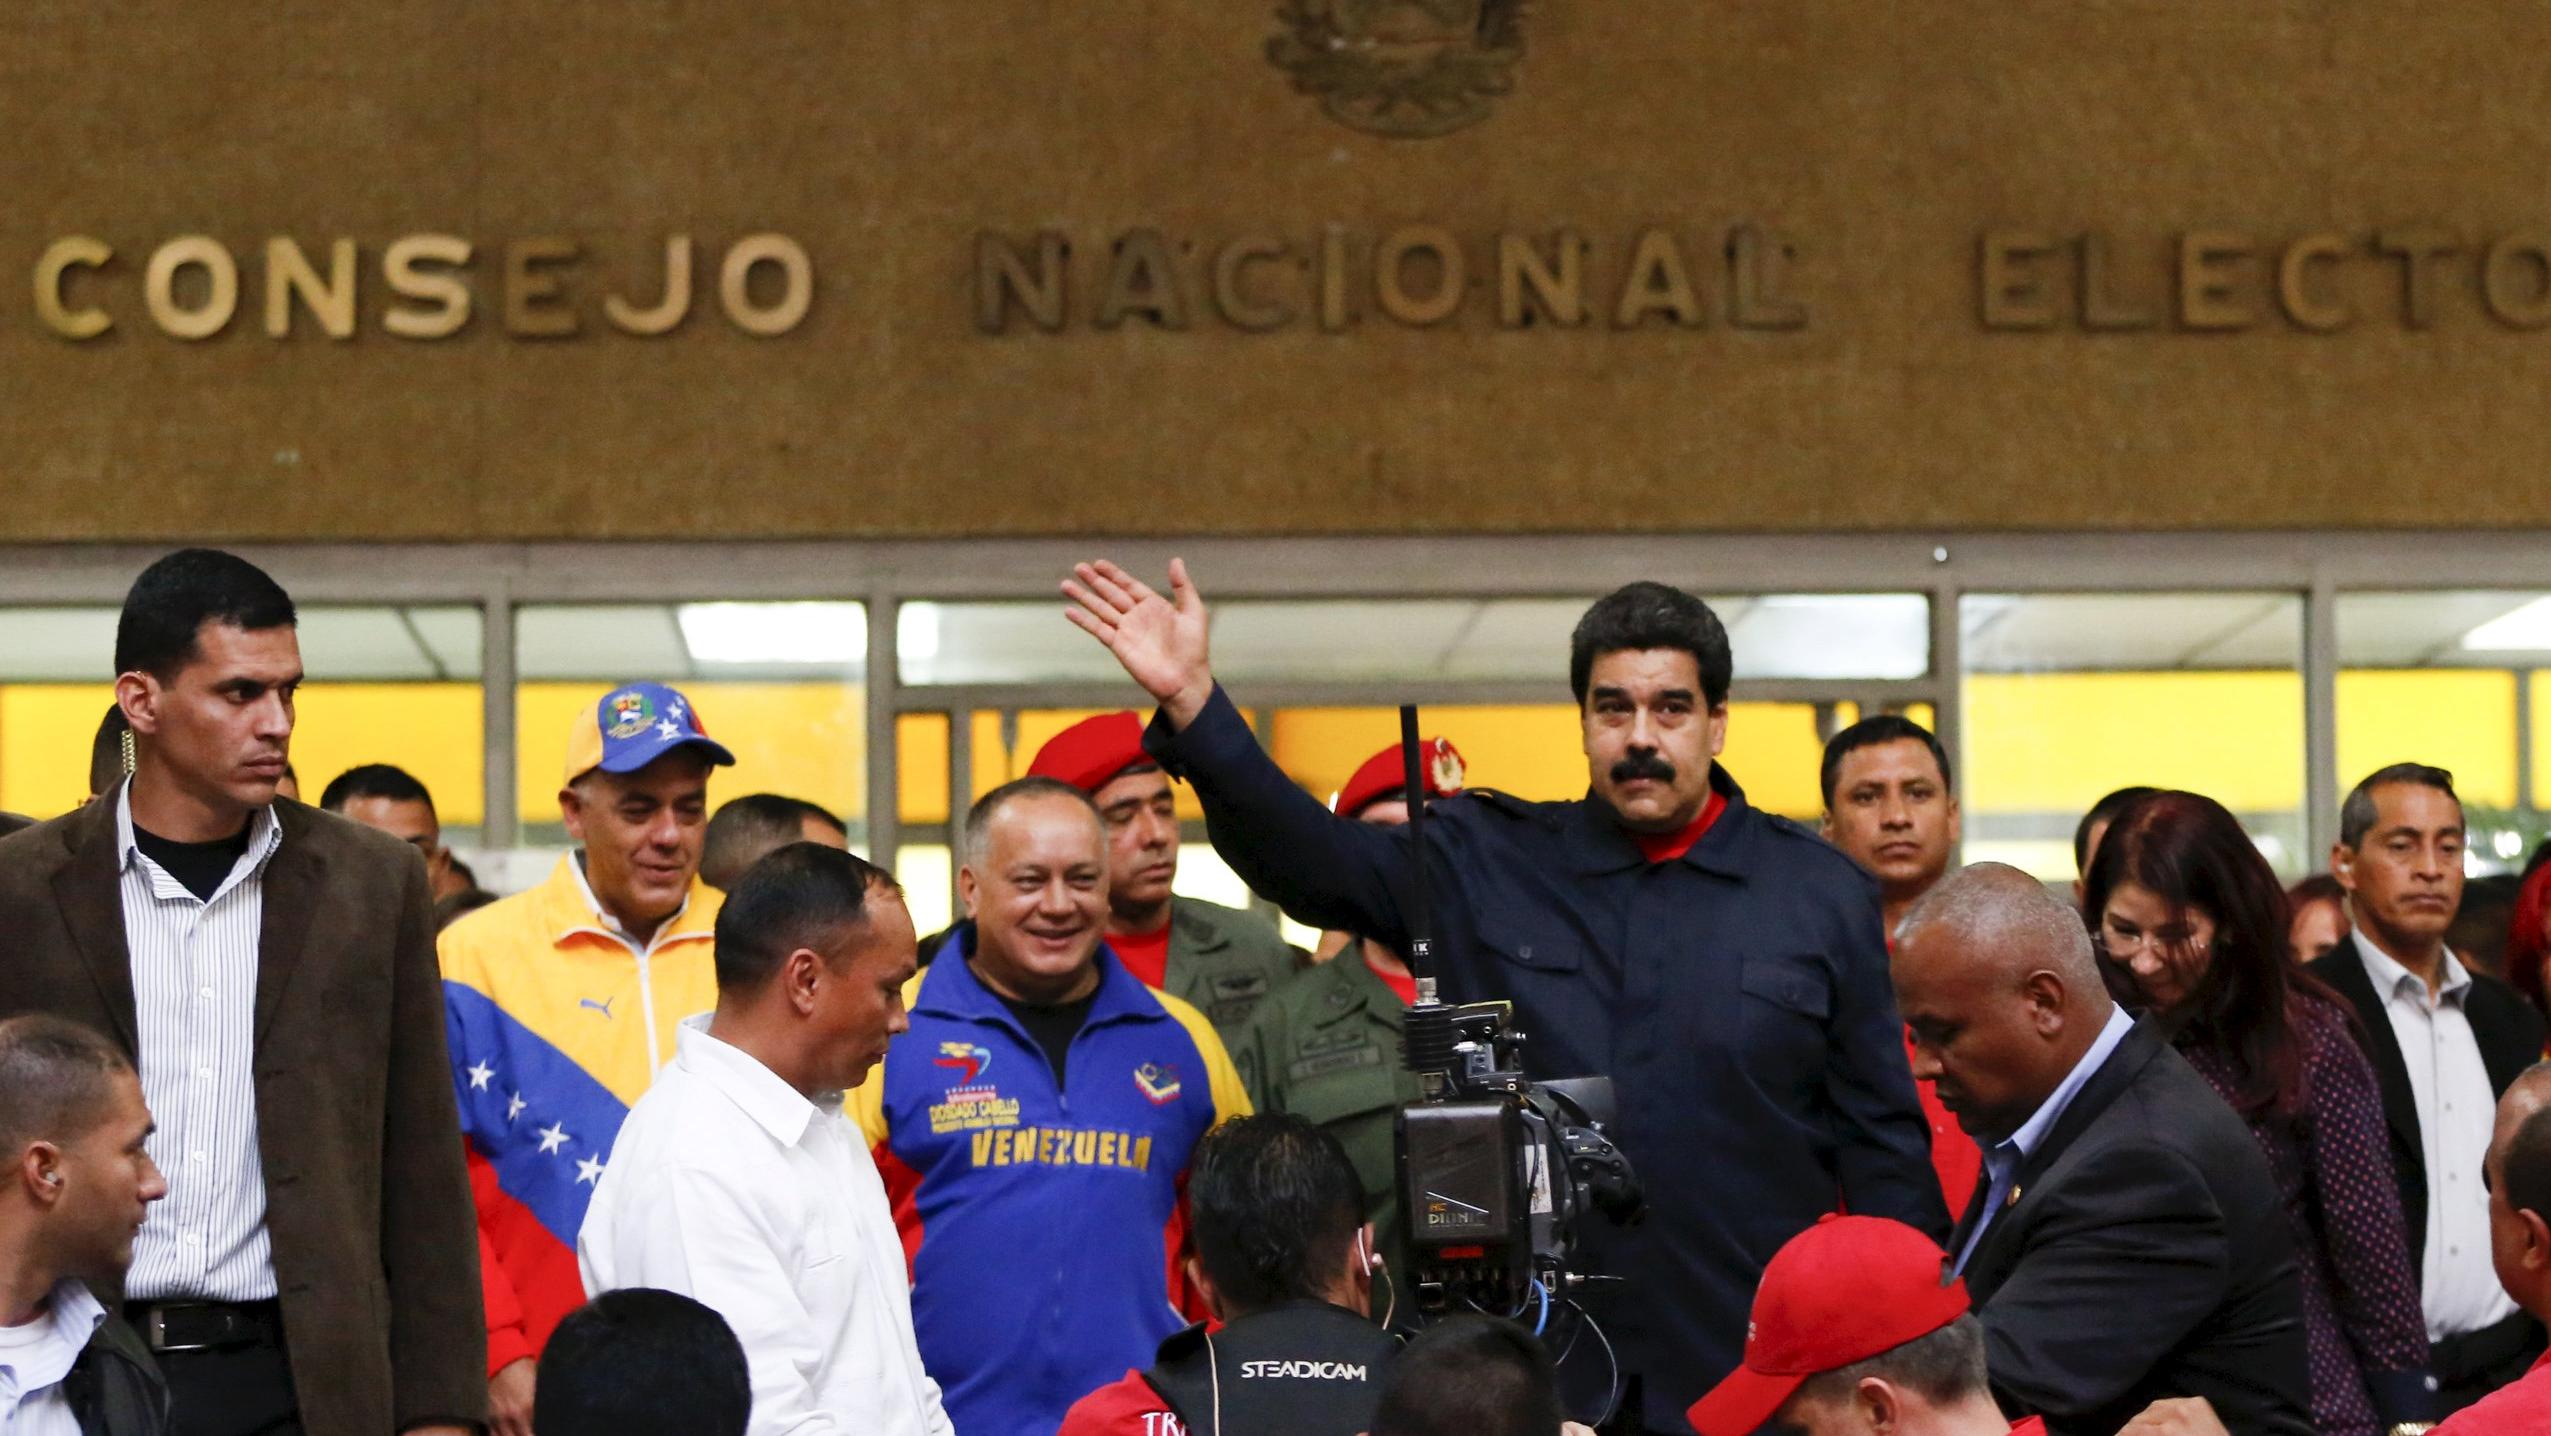 Venezuela's President Nicolas Maduro (C) waves as he walks out of the National Electoral Council (CNE) headquarters in Caracas October 26, 2015.